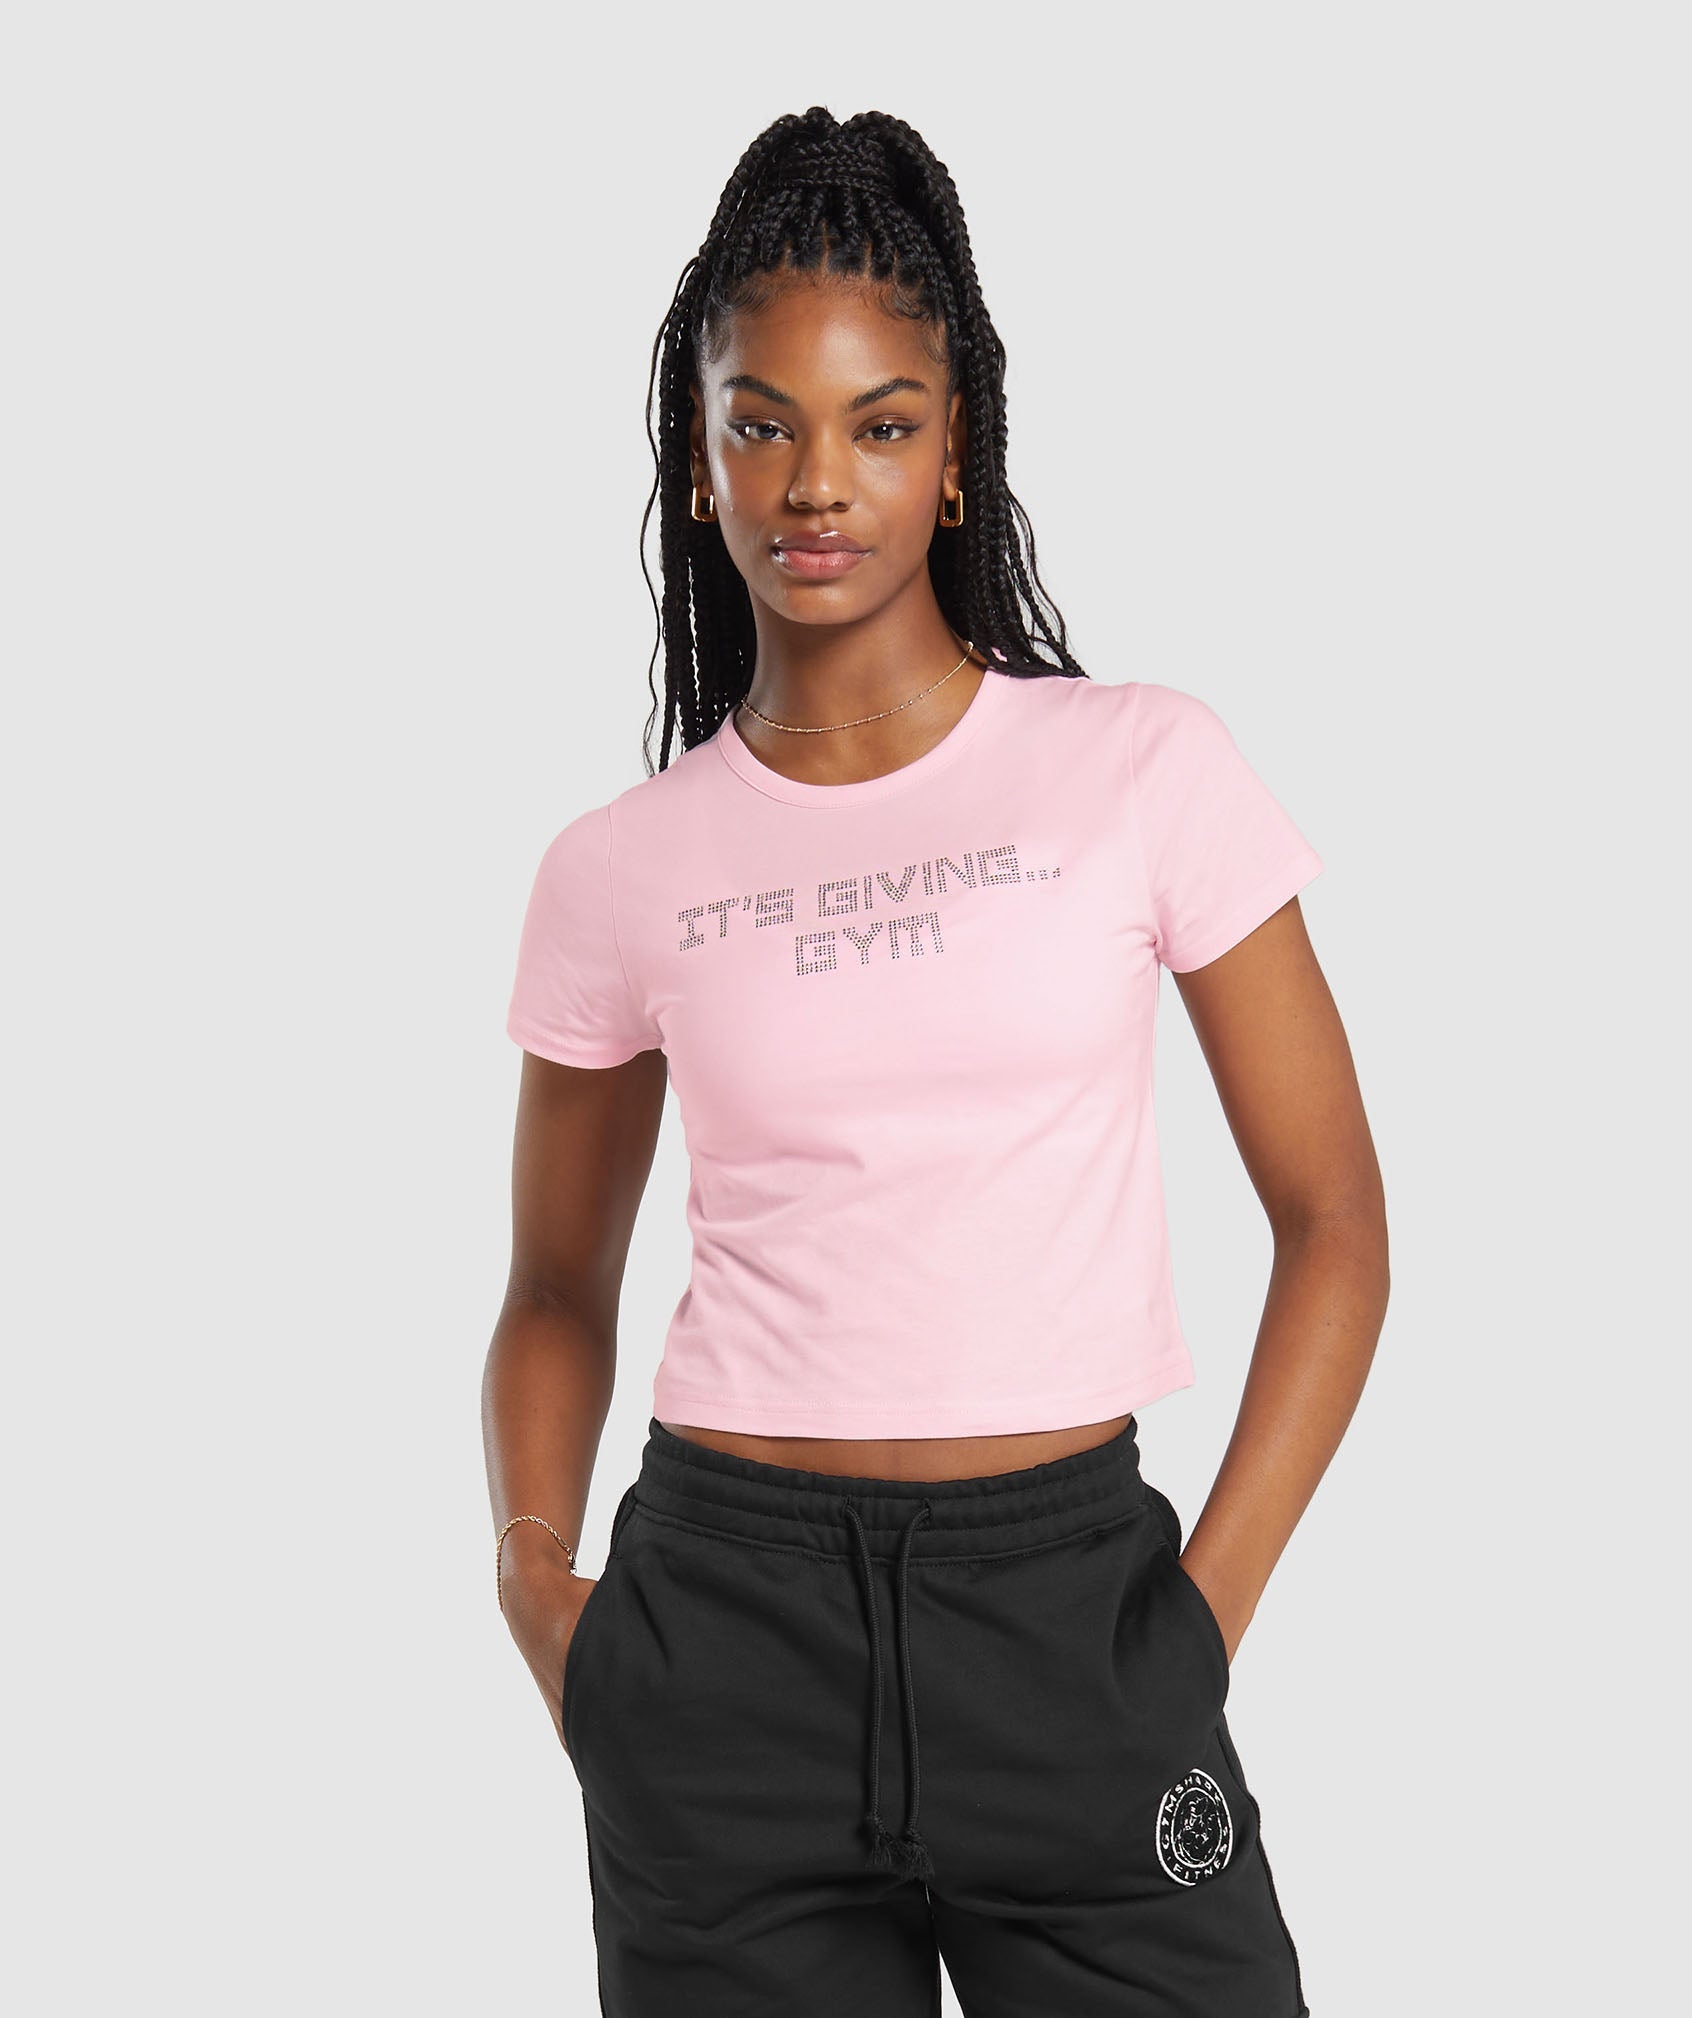 Its Giving Gym Baby T-Shirt